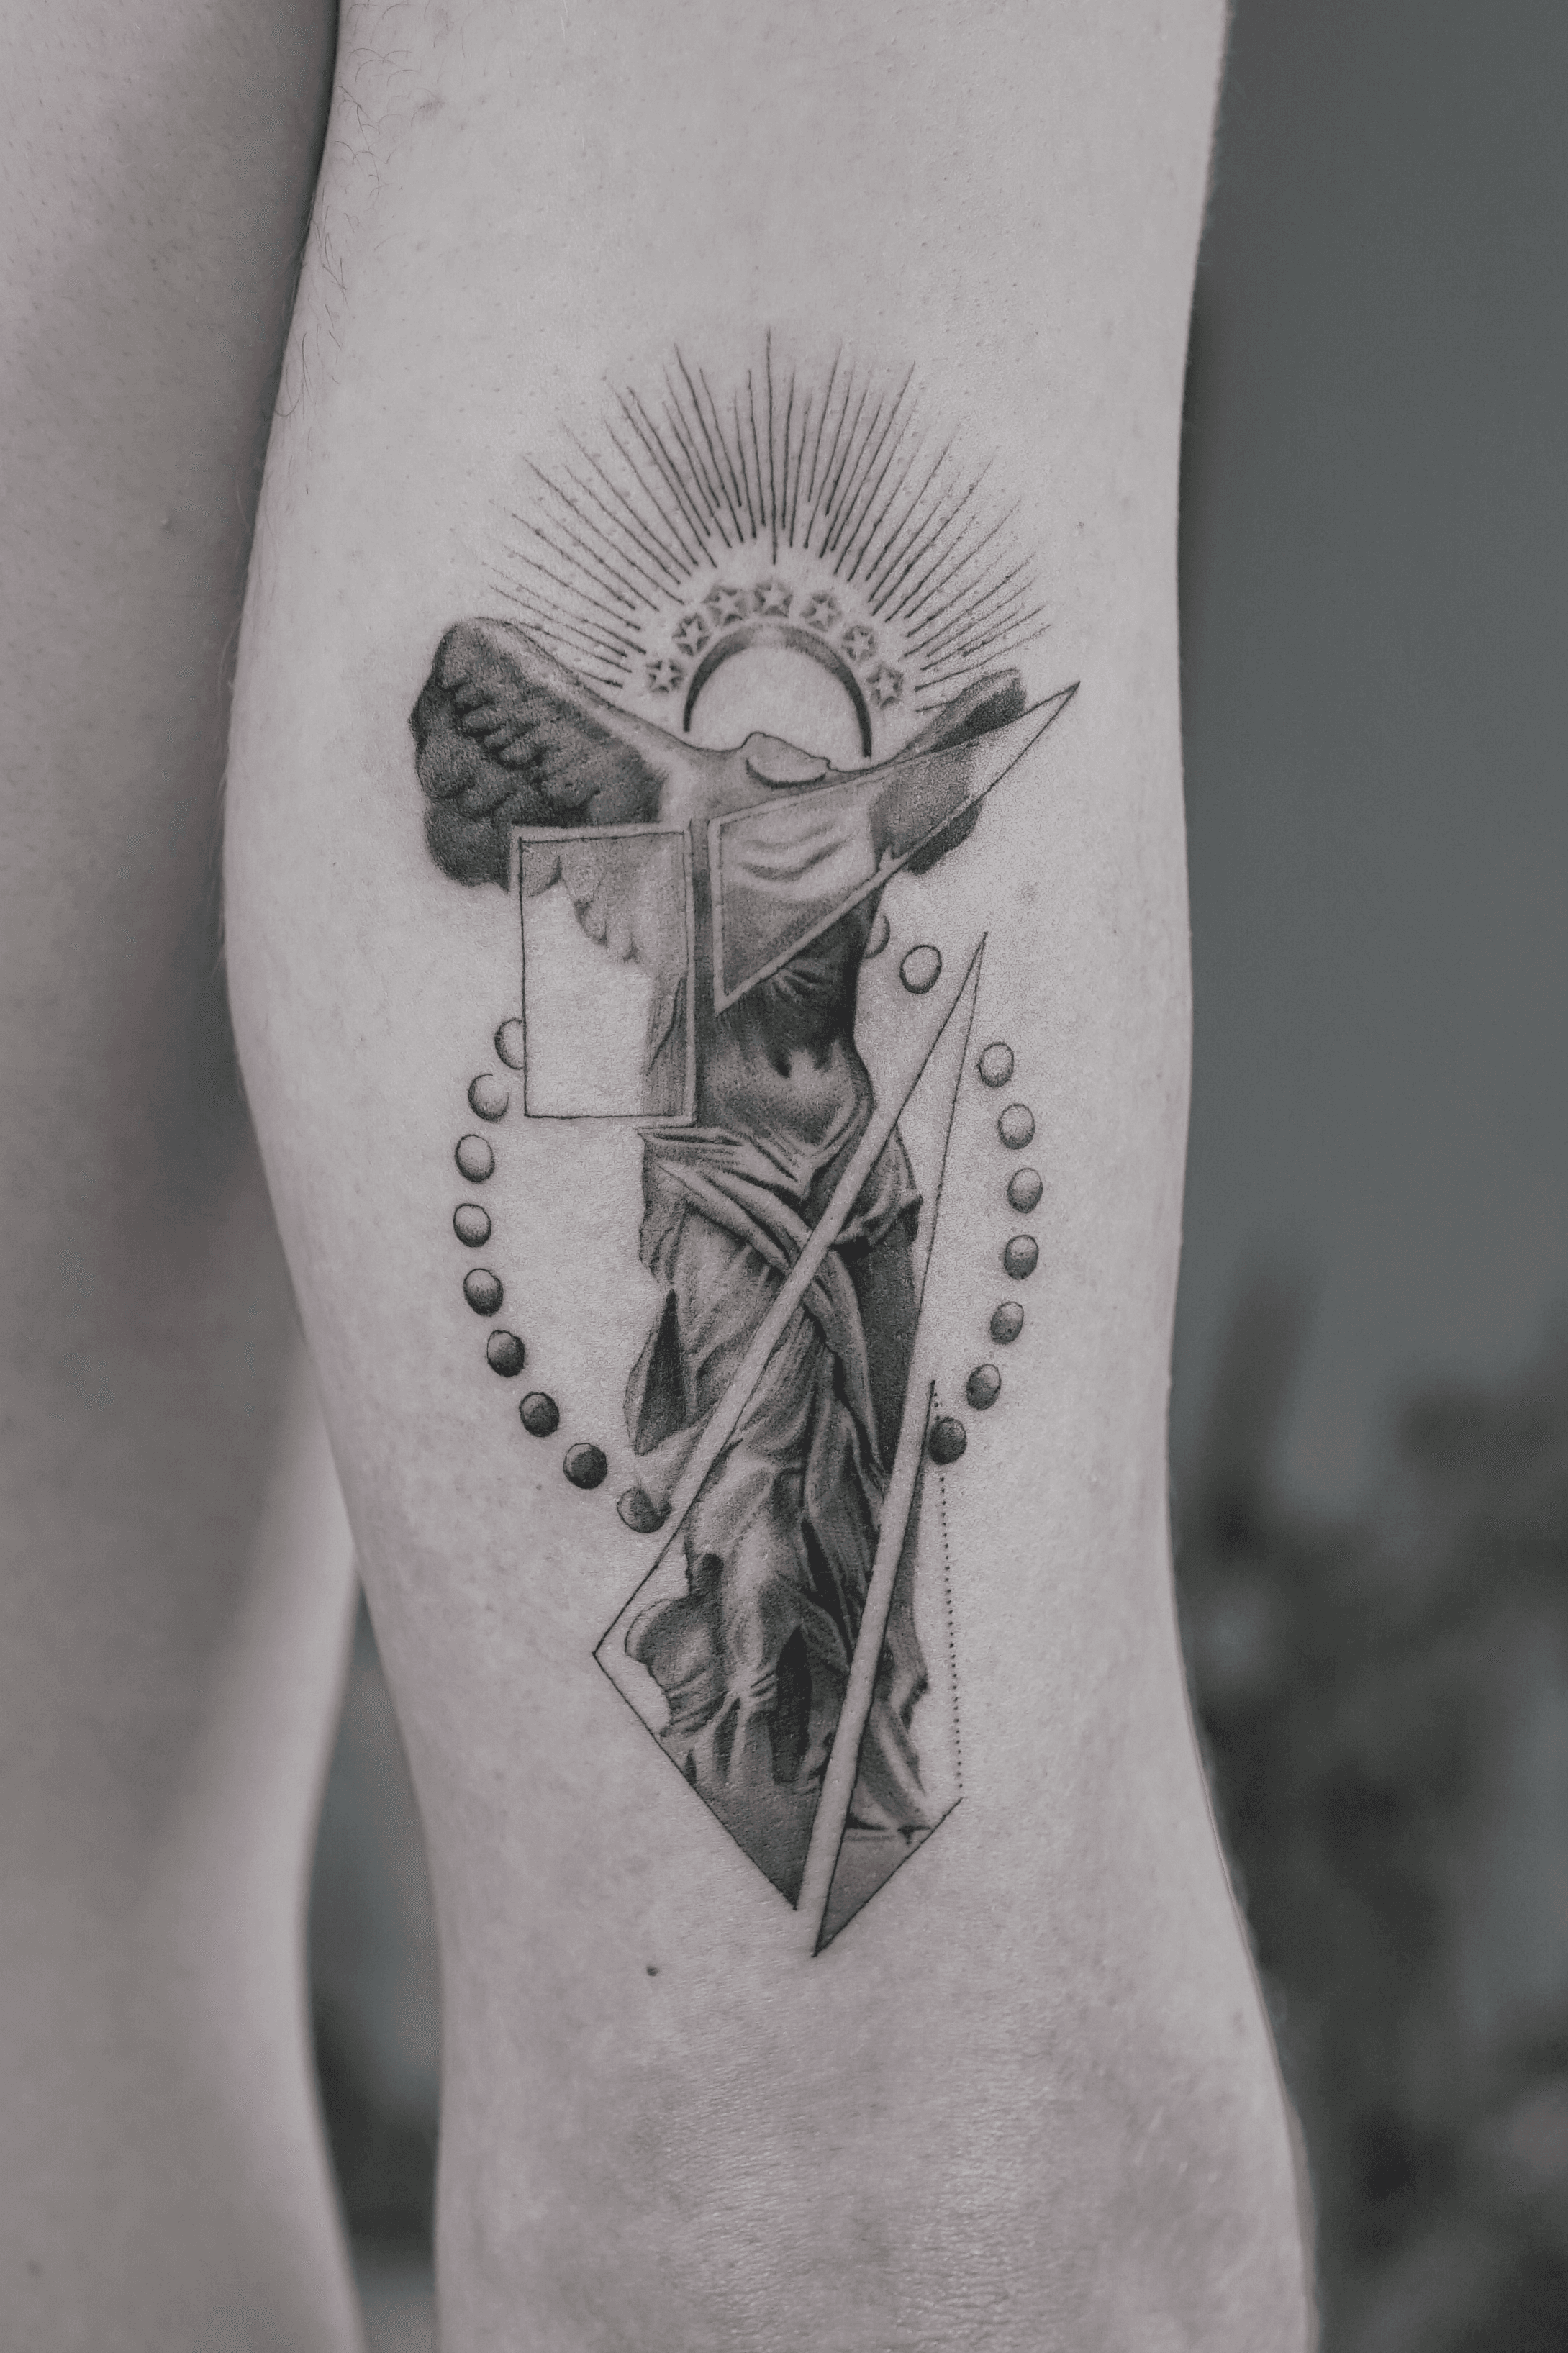 Got to do another winged victory